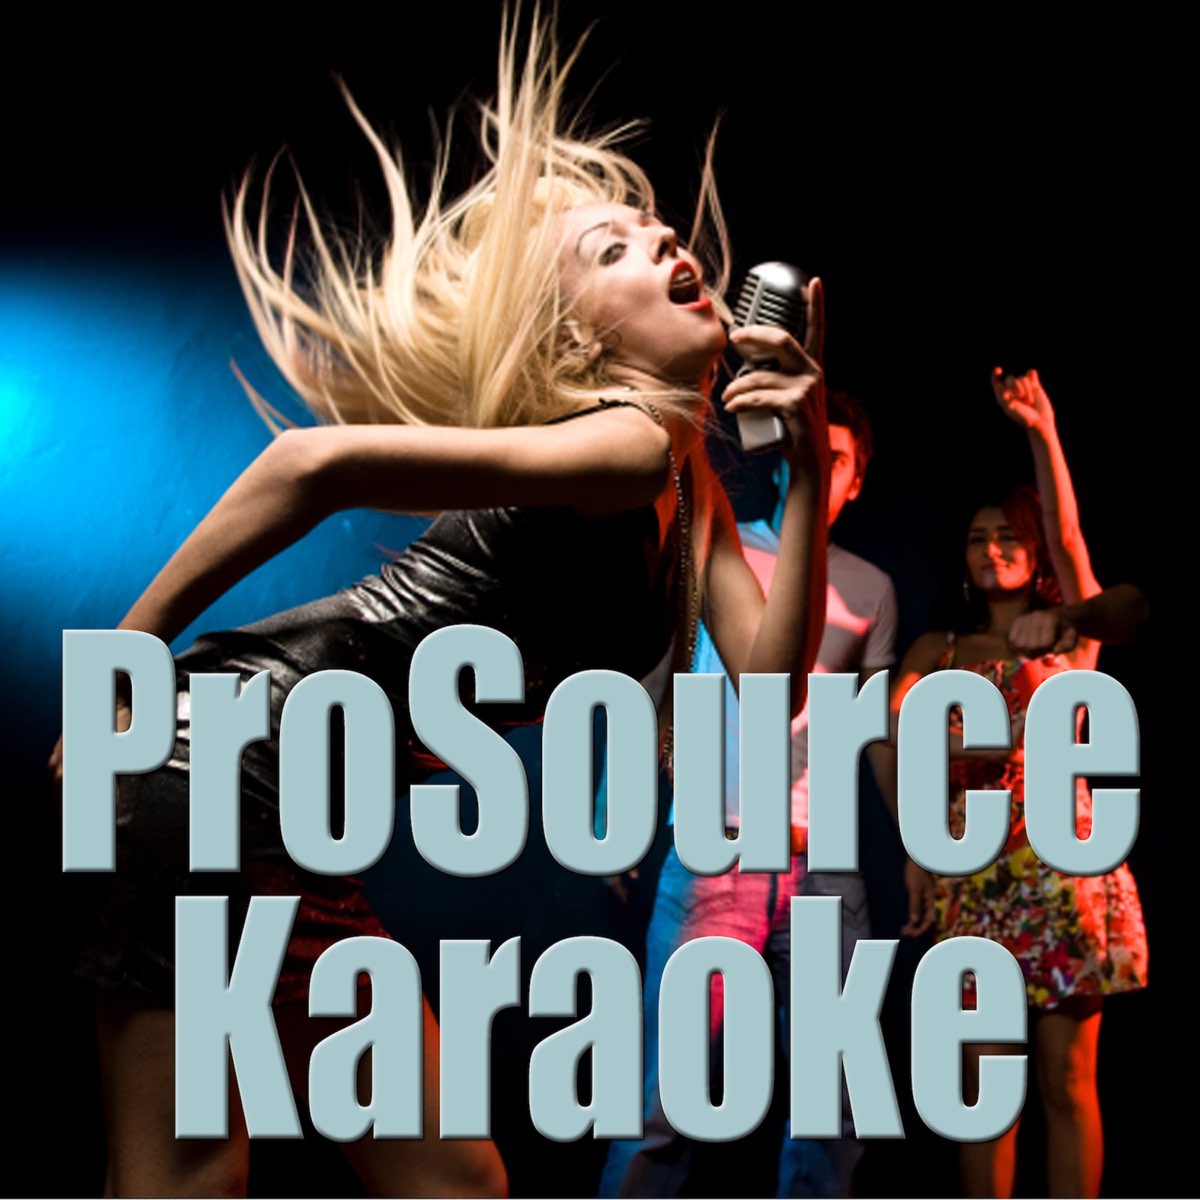 Truly Madly Deeply (Originally Performed by Savage Garden) [Instrumental] -  Single - Album by ProSource Karaoke Band - Apple Music